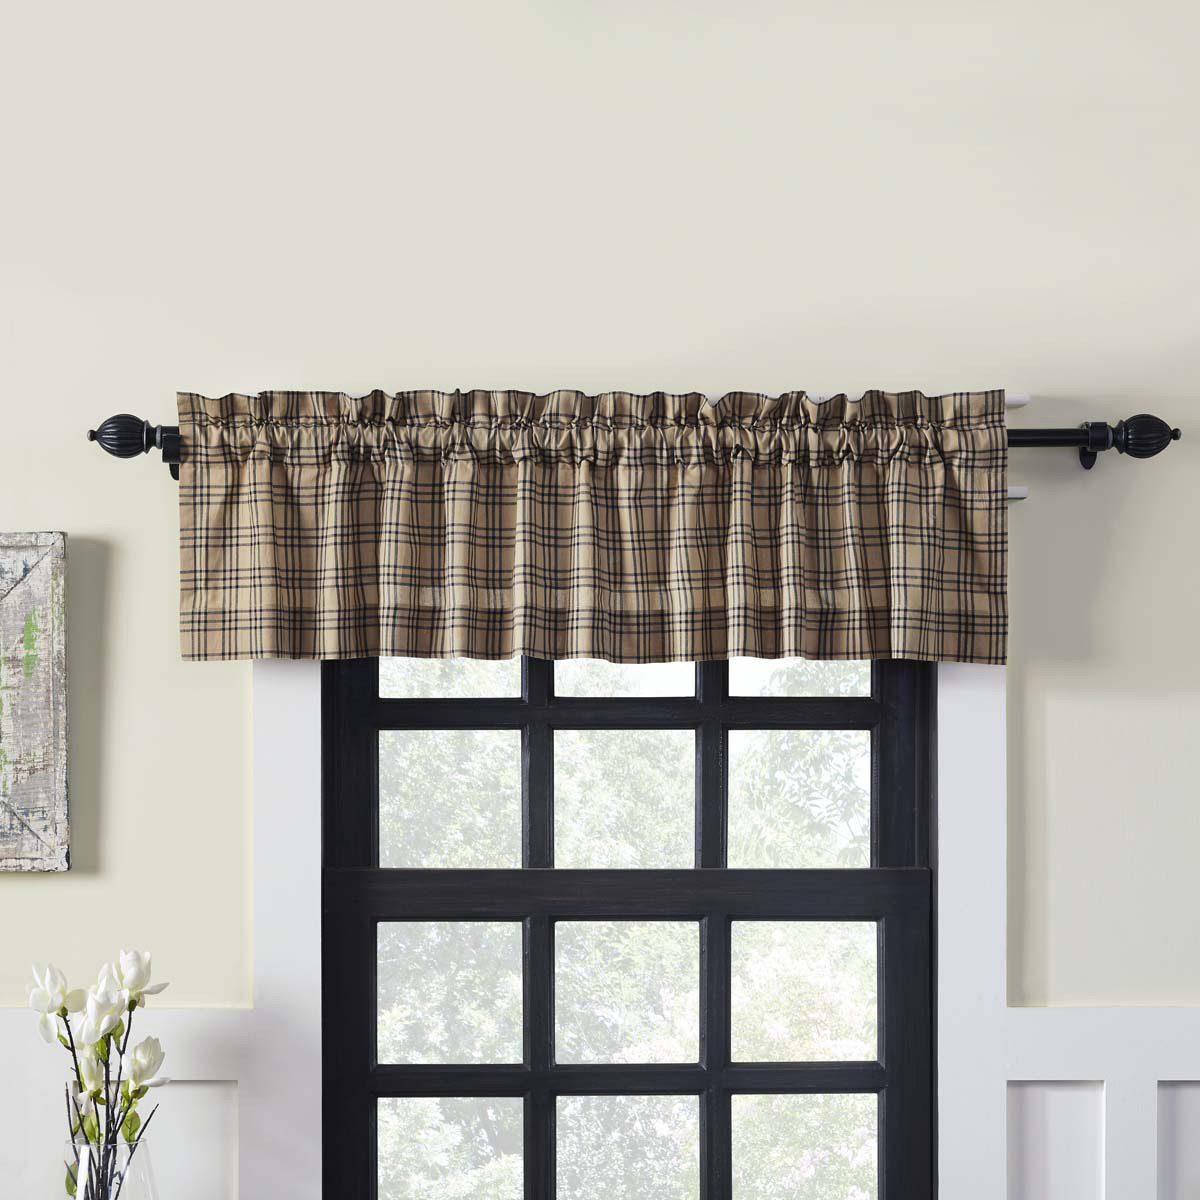 Sawyer Mill Plaid Valance, by VHC Brands.